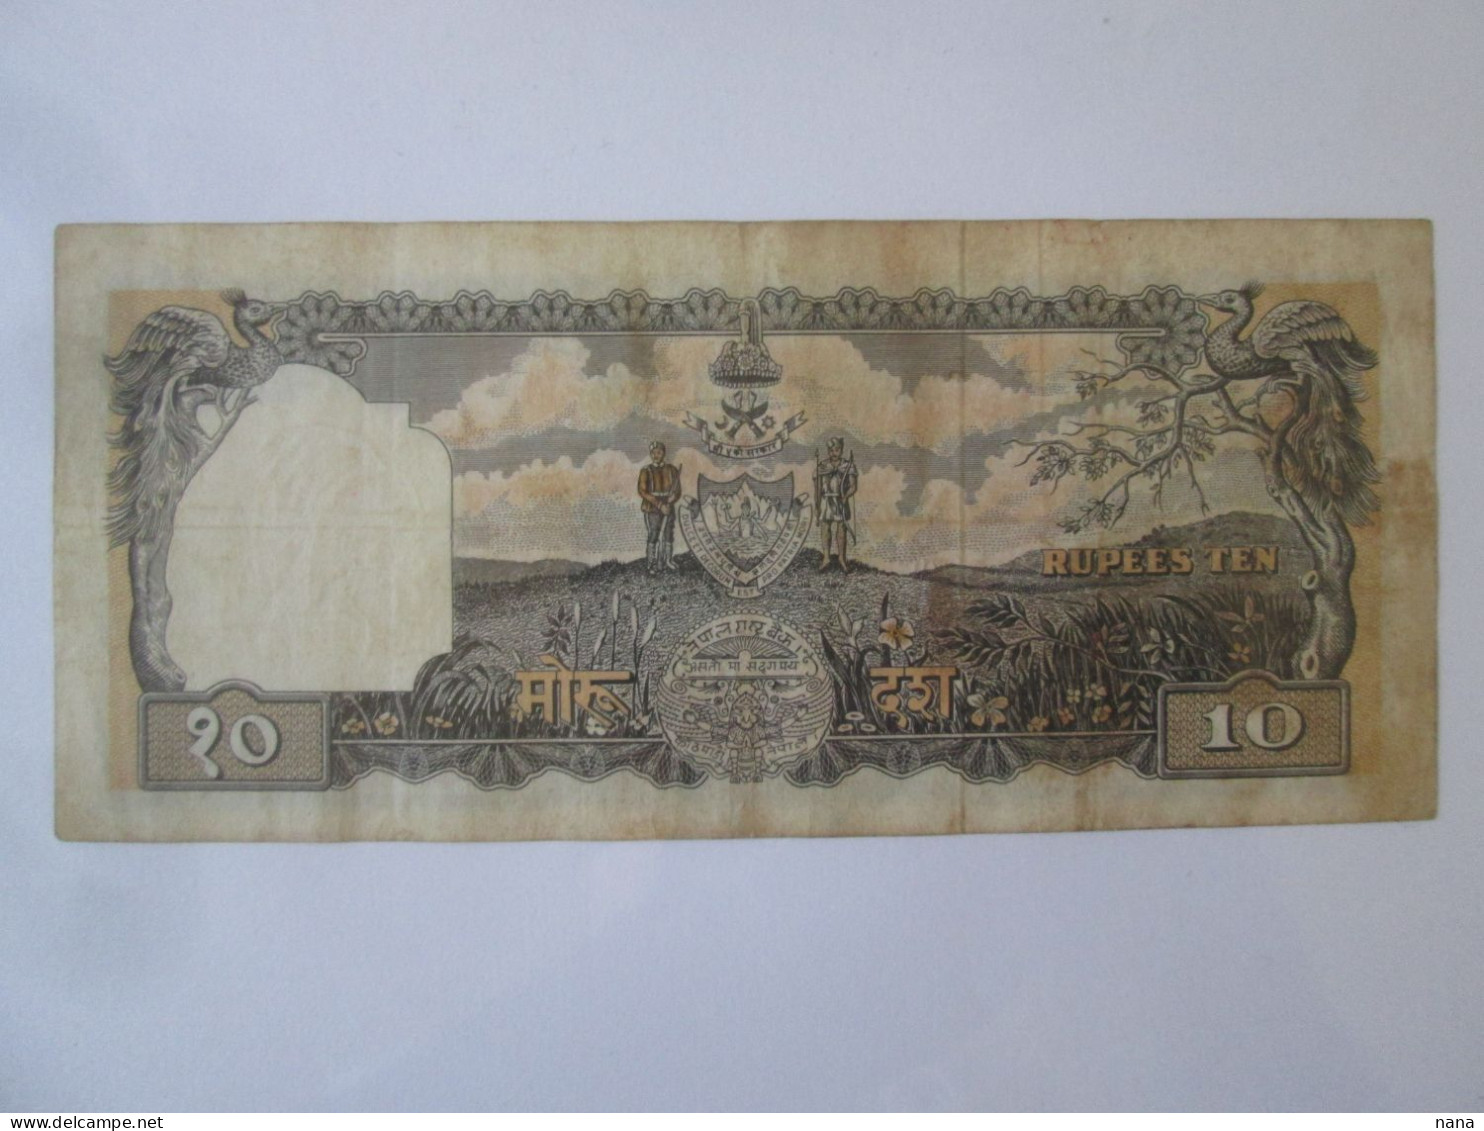 Rare! Nepal 10 Rupees 1961 Banknote,see Pictures - Nepal